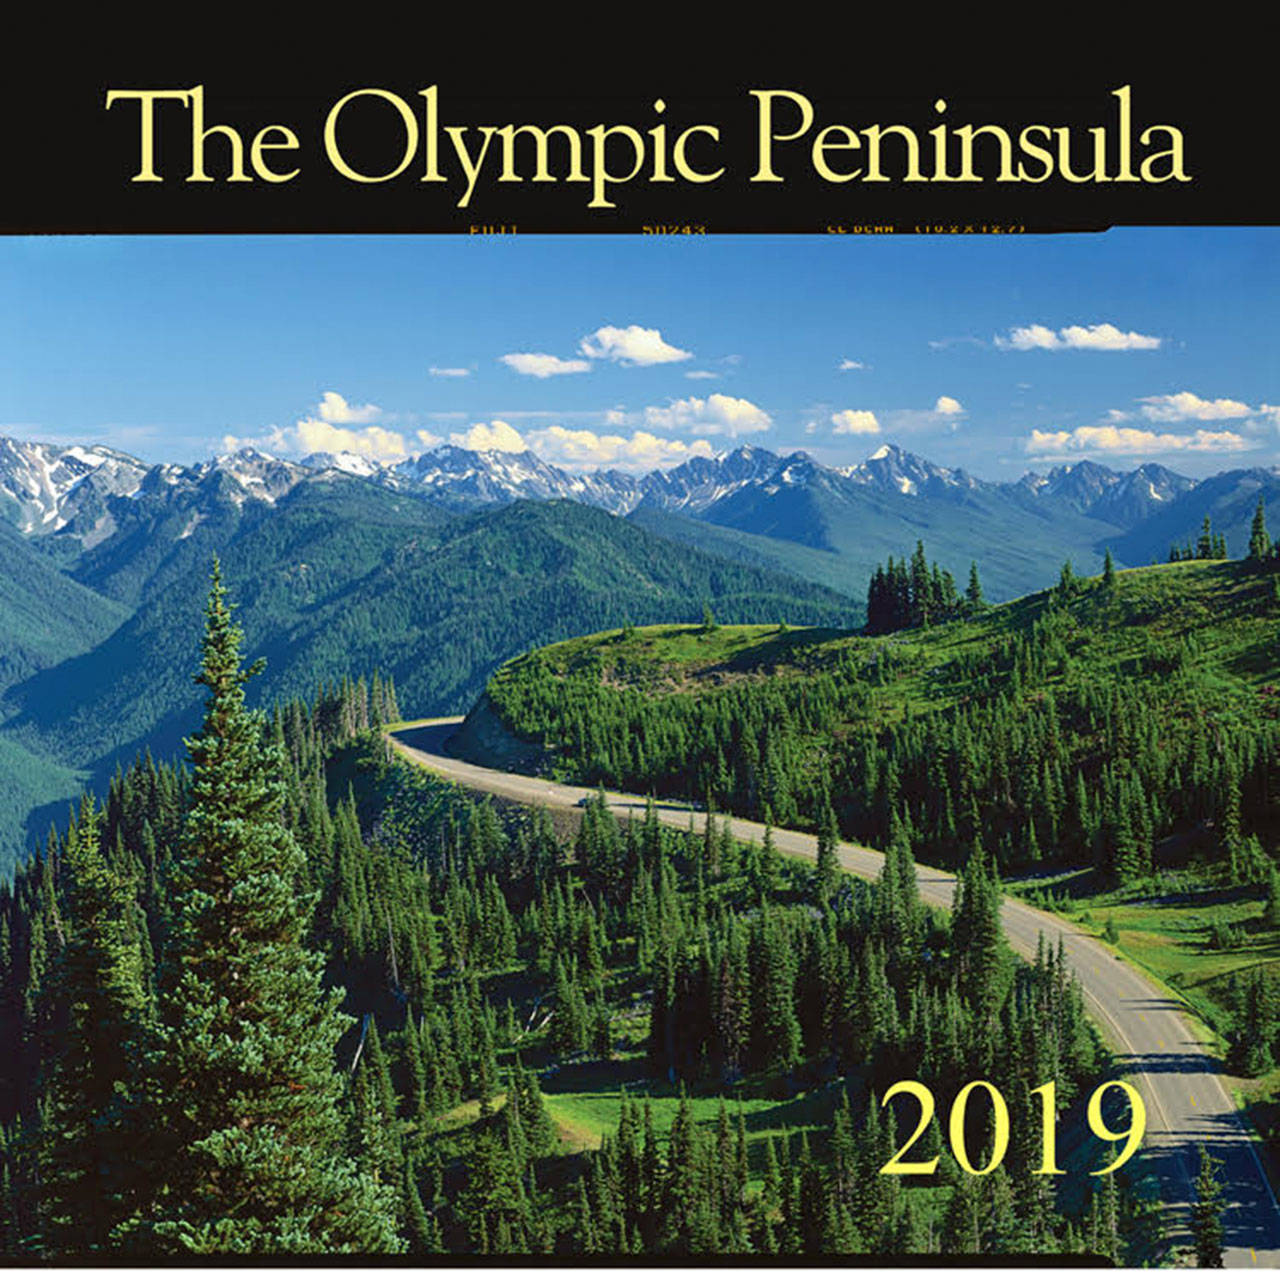 The cover of Ross Hamilton’s 2019 wall calendar features a shot of Hurricane Ridge Road. Photo by Ross Hamilton